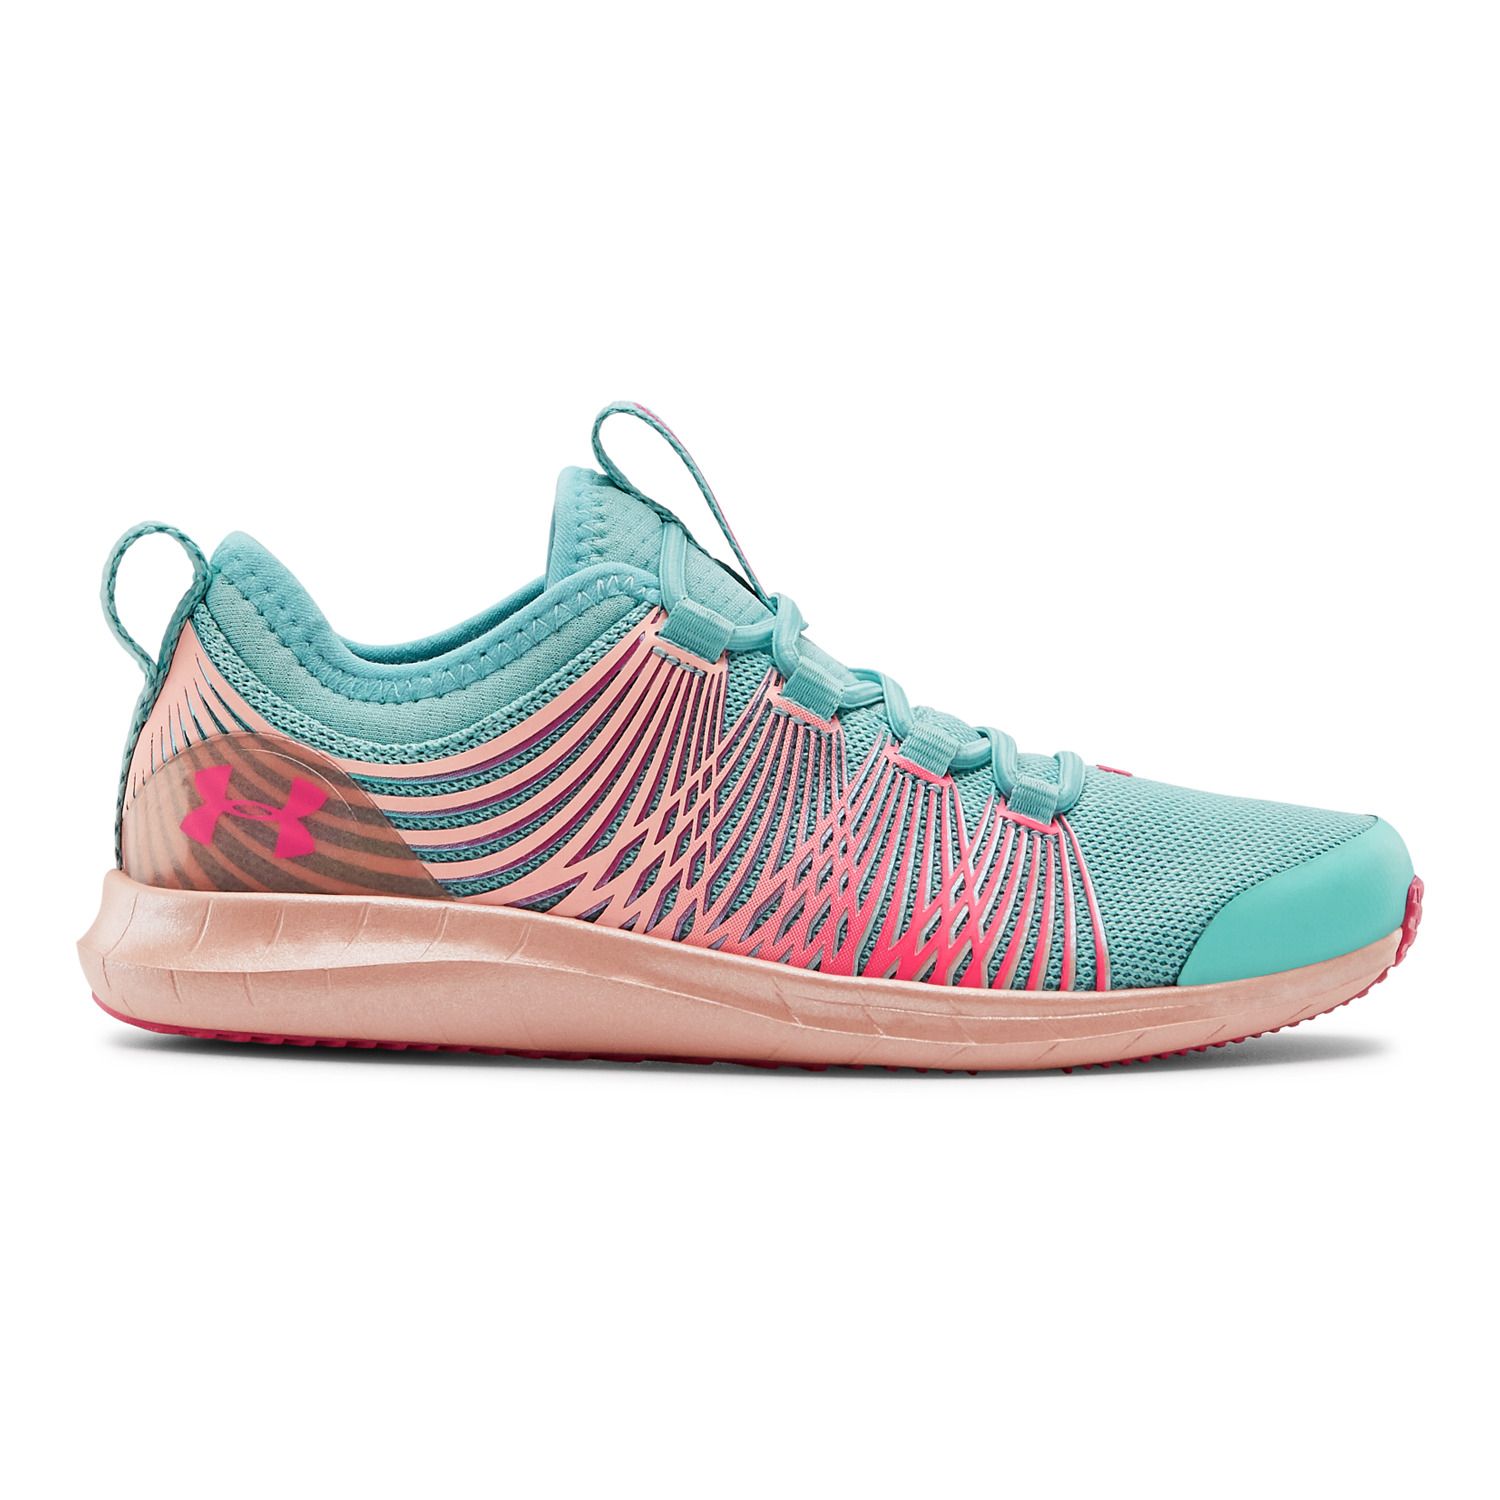 under armour girls sneakers